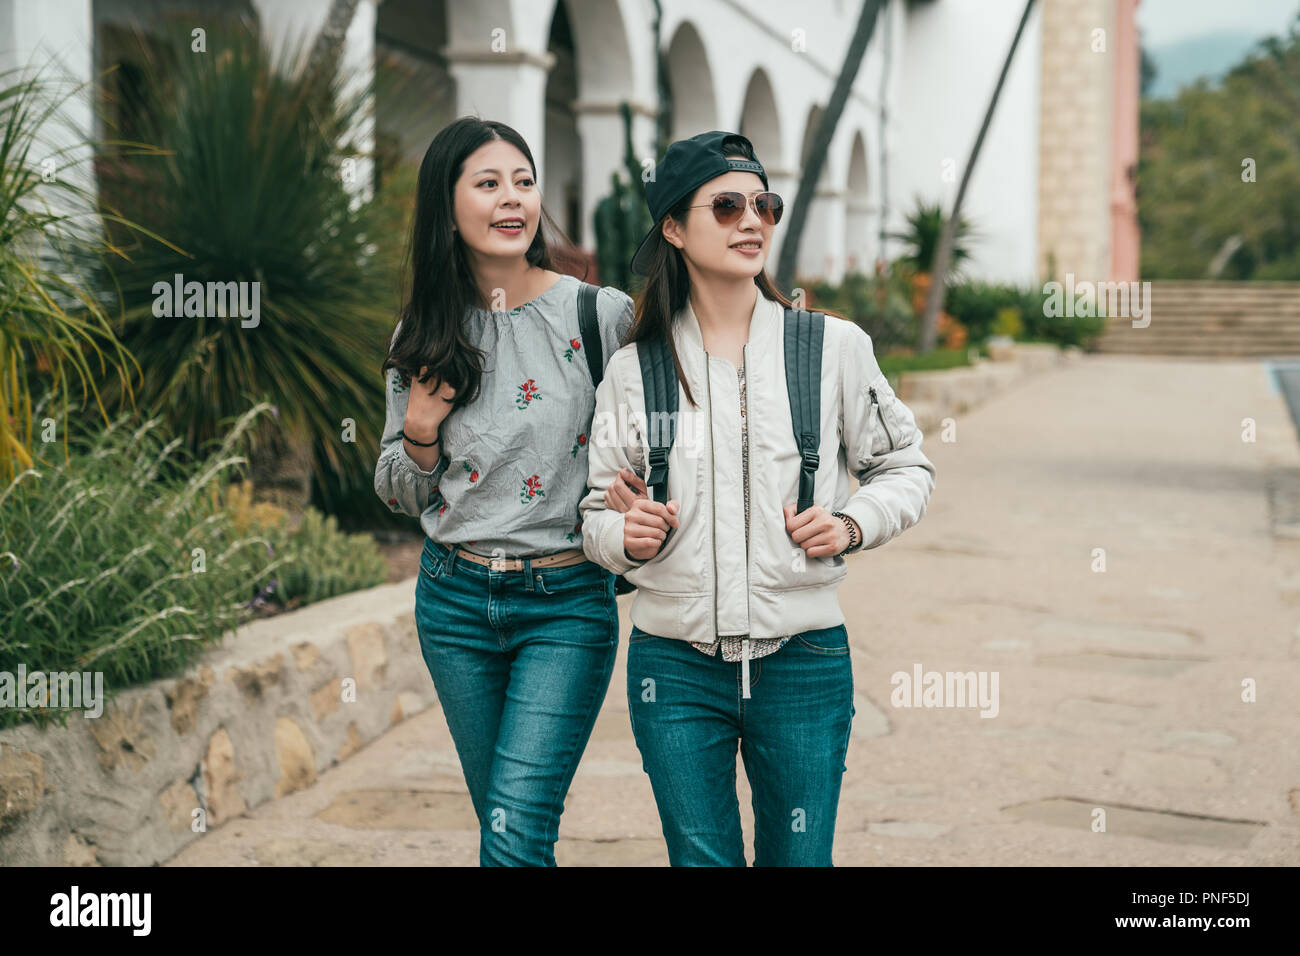 young beautiful friends walking in the sidewalk and feeling cheerful and relaxed while sightseeing. Stock Photo